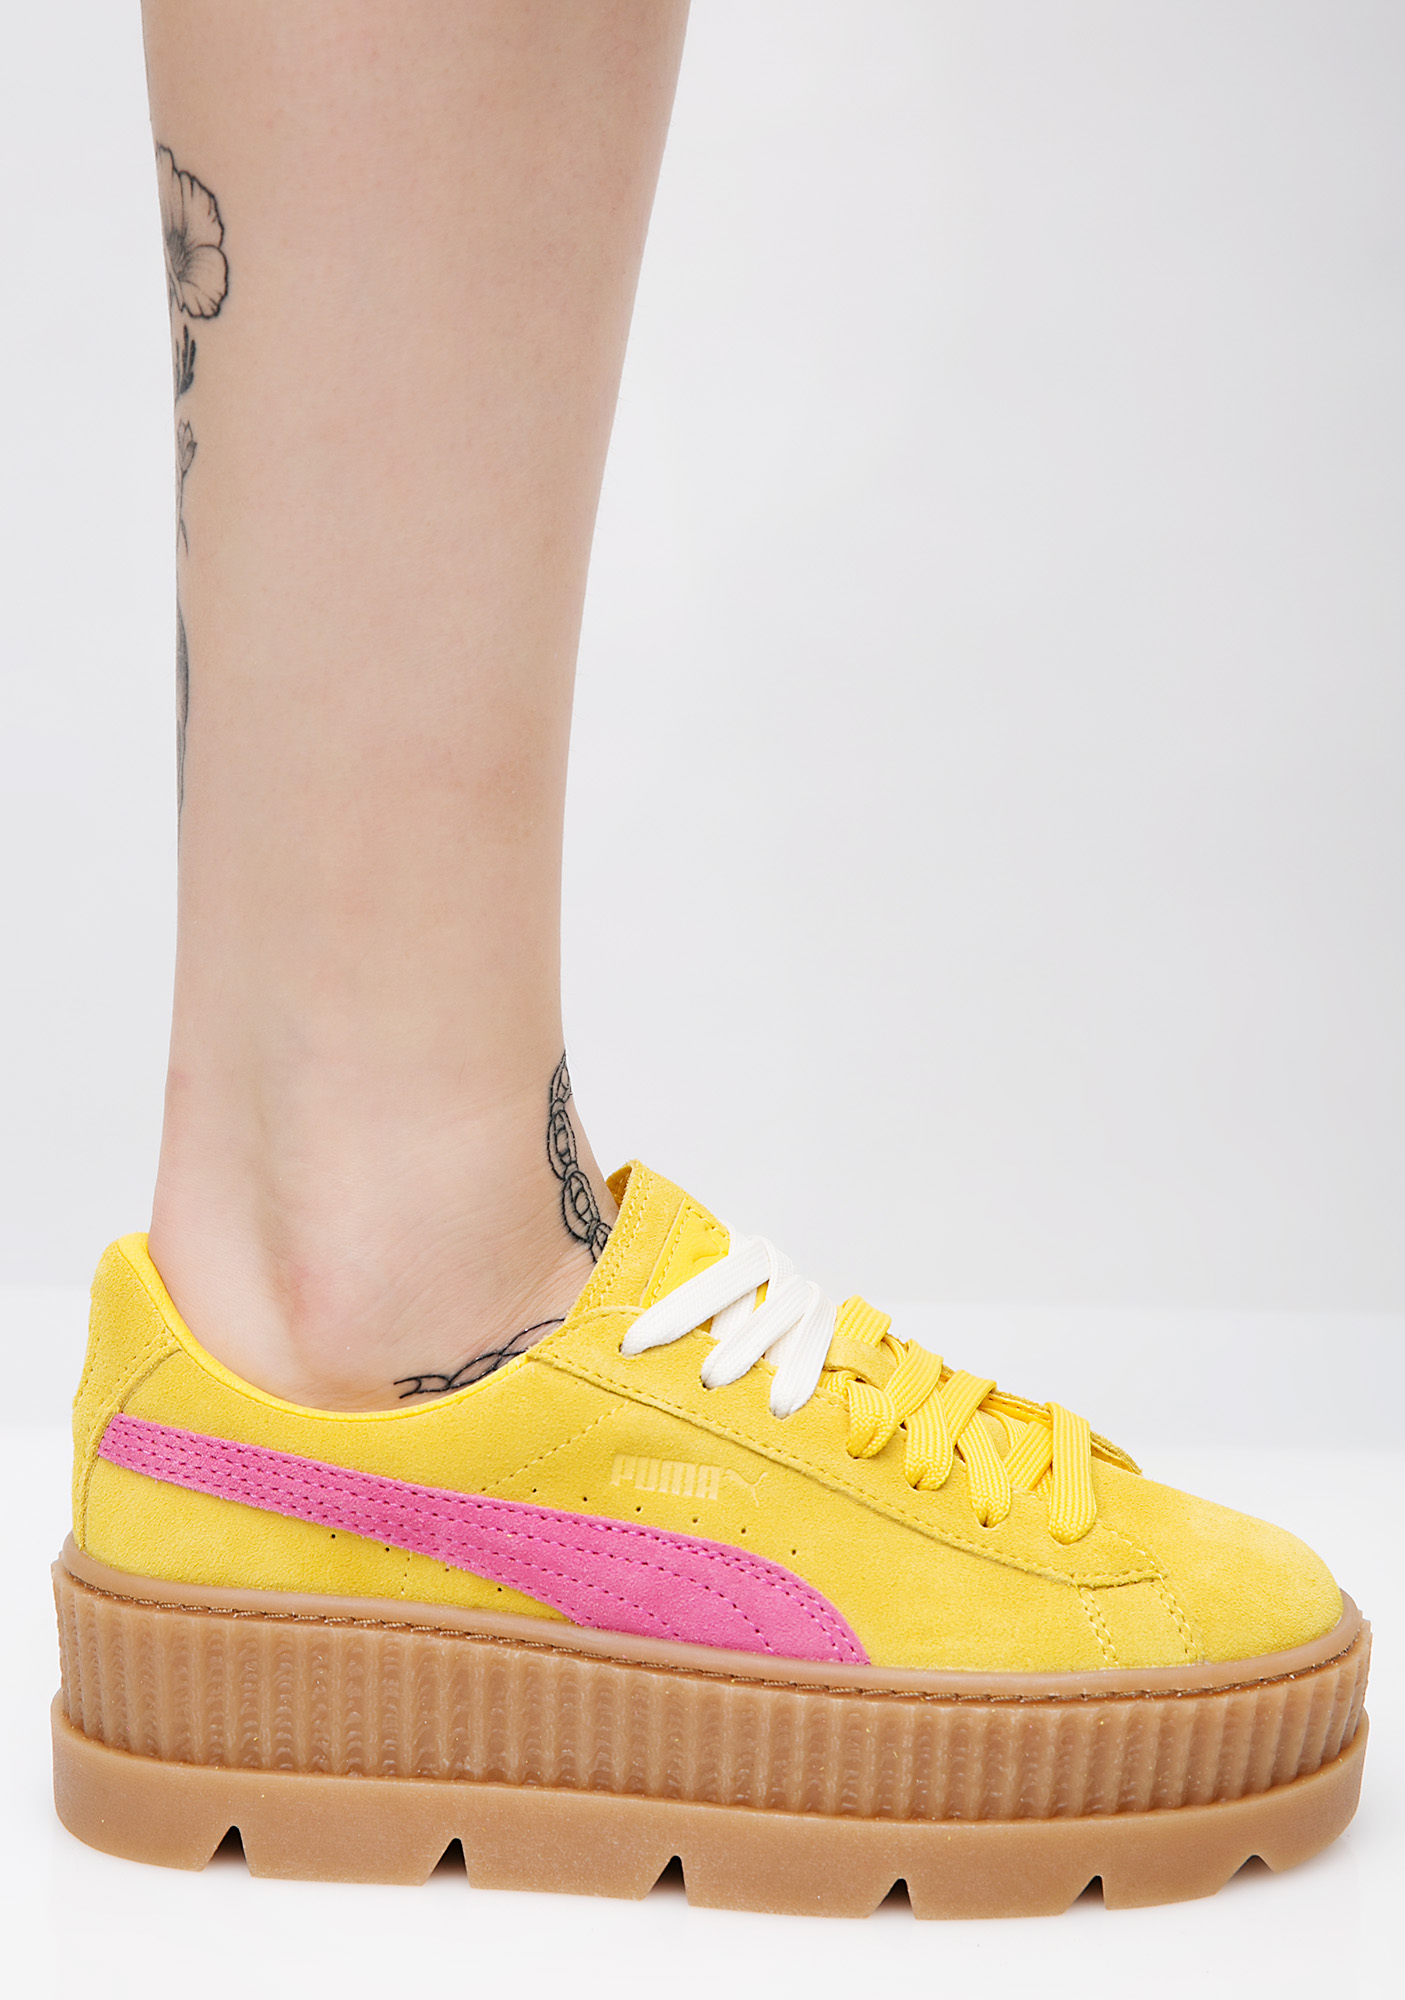 puma creepers yellow and pink